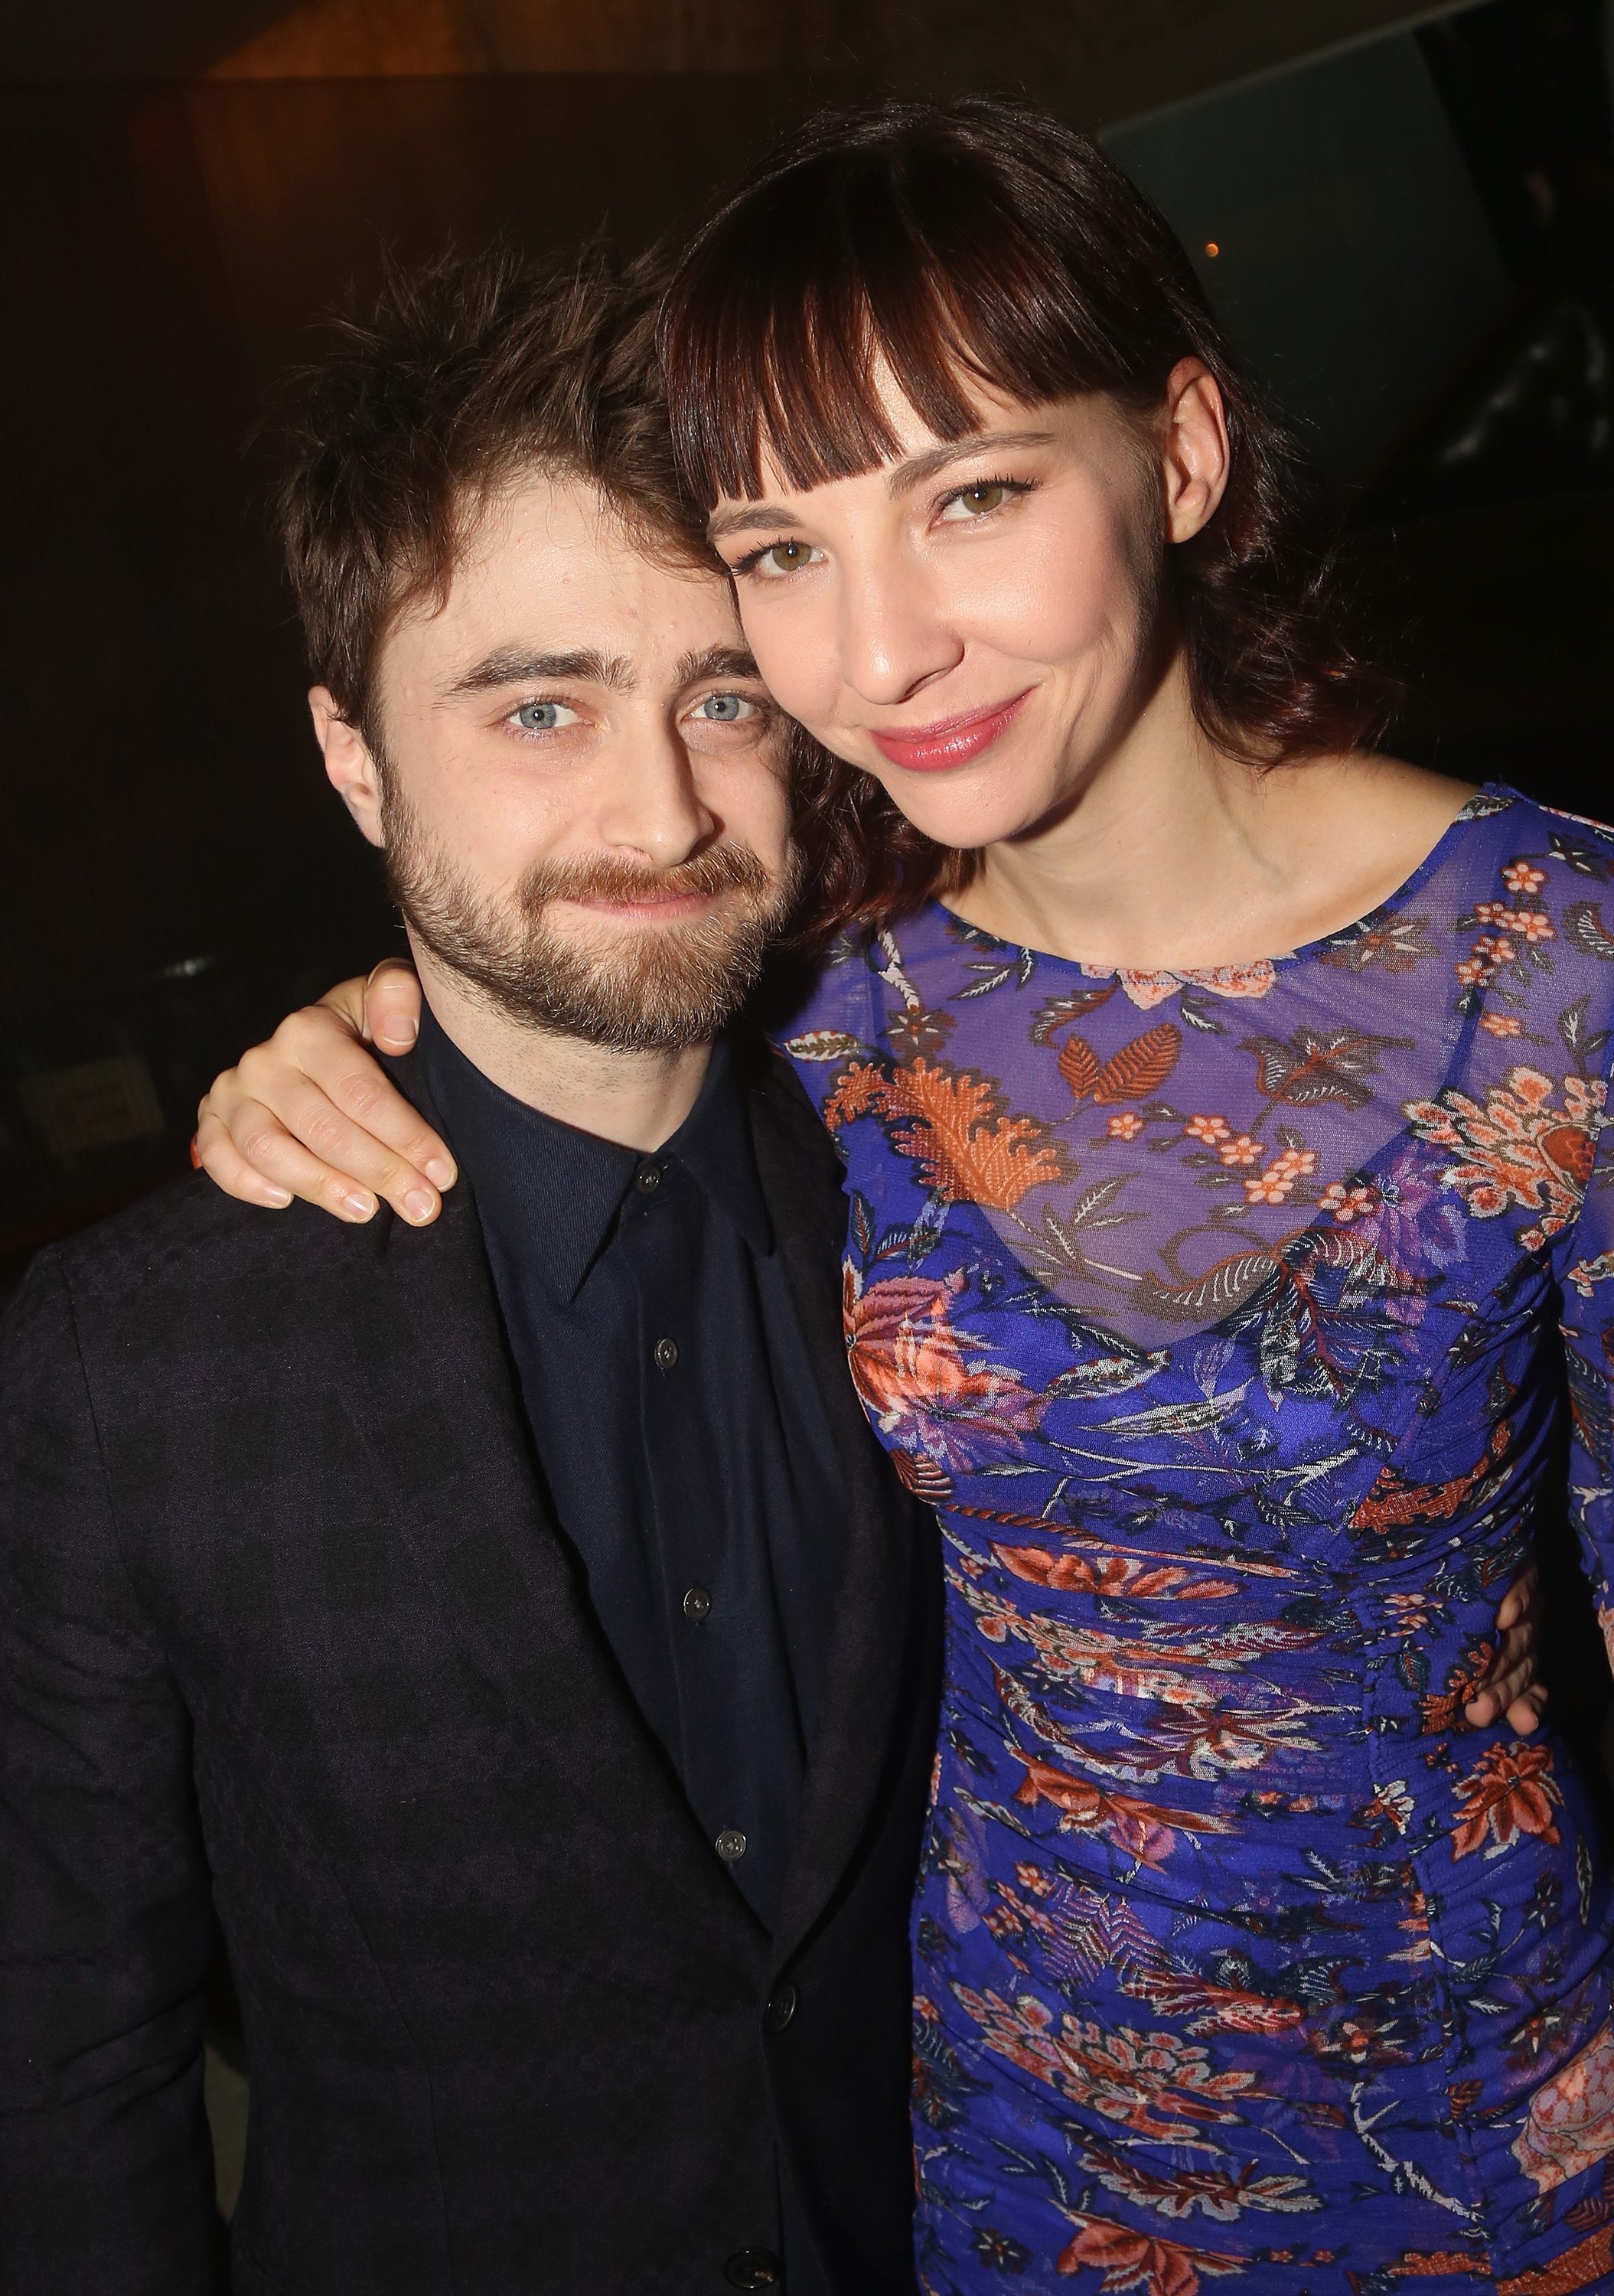 Daniel Radcliffe and Erin Darke at the "The Lifespan of Fact" opening night in New York in 2018 | Source: Getty Images